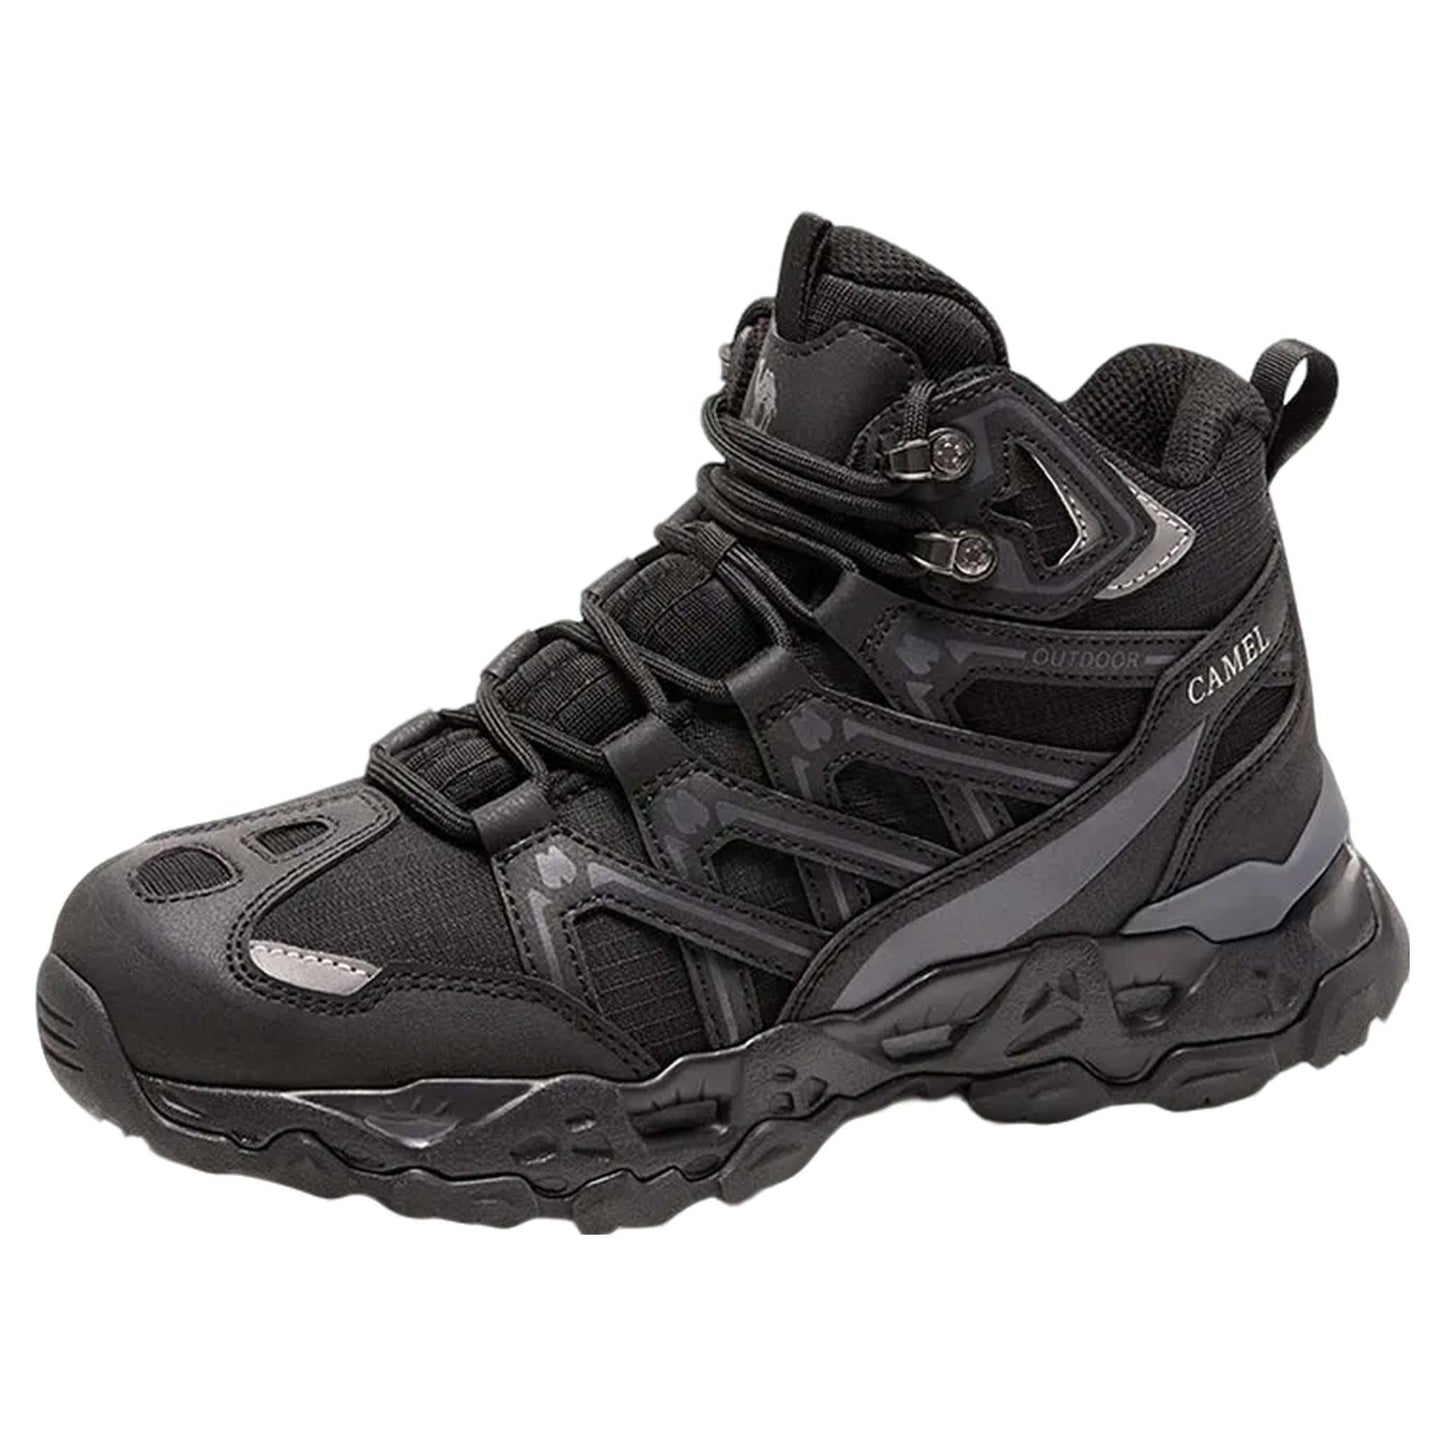 Women's Ascent - Cushioned Non-Slip Hiking Boots